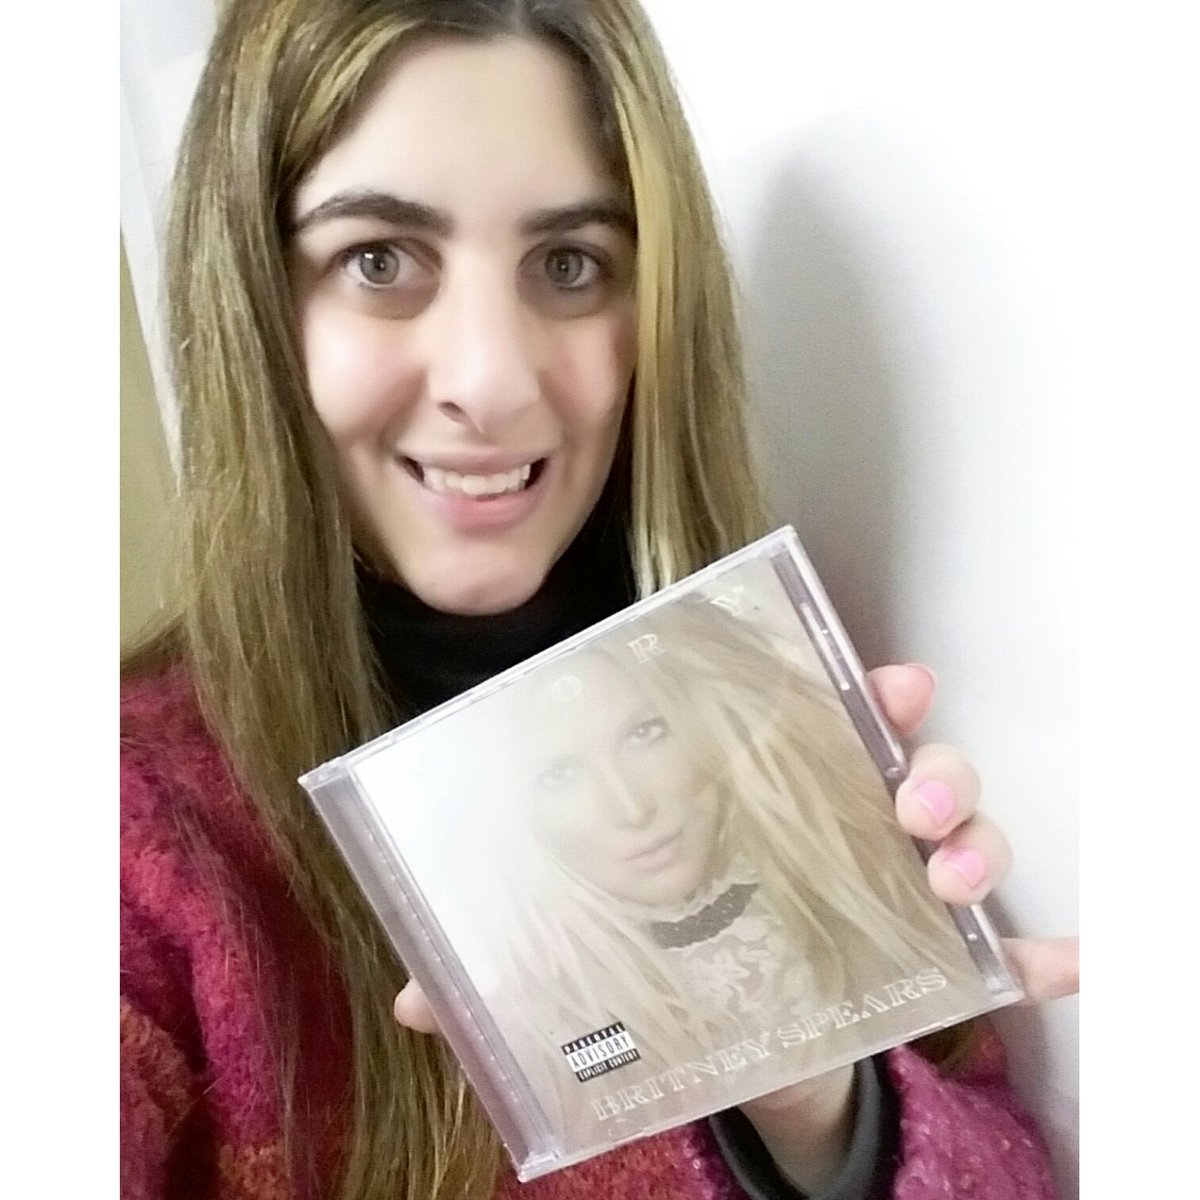 RT @Josee_Spears: @britneyspears I have #Glory with me in Argentina! Thank you for this amazing album ???? ???? #MakeBritneyNumberOne https://t.c…